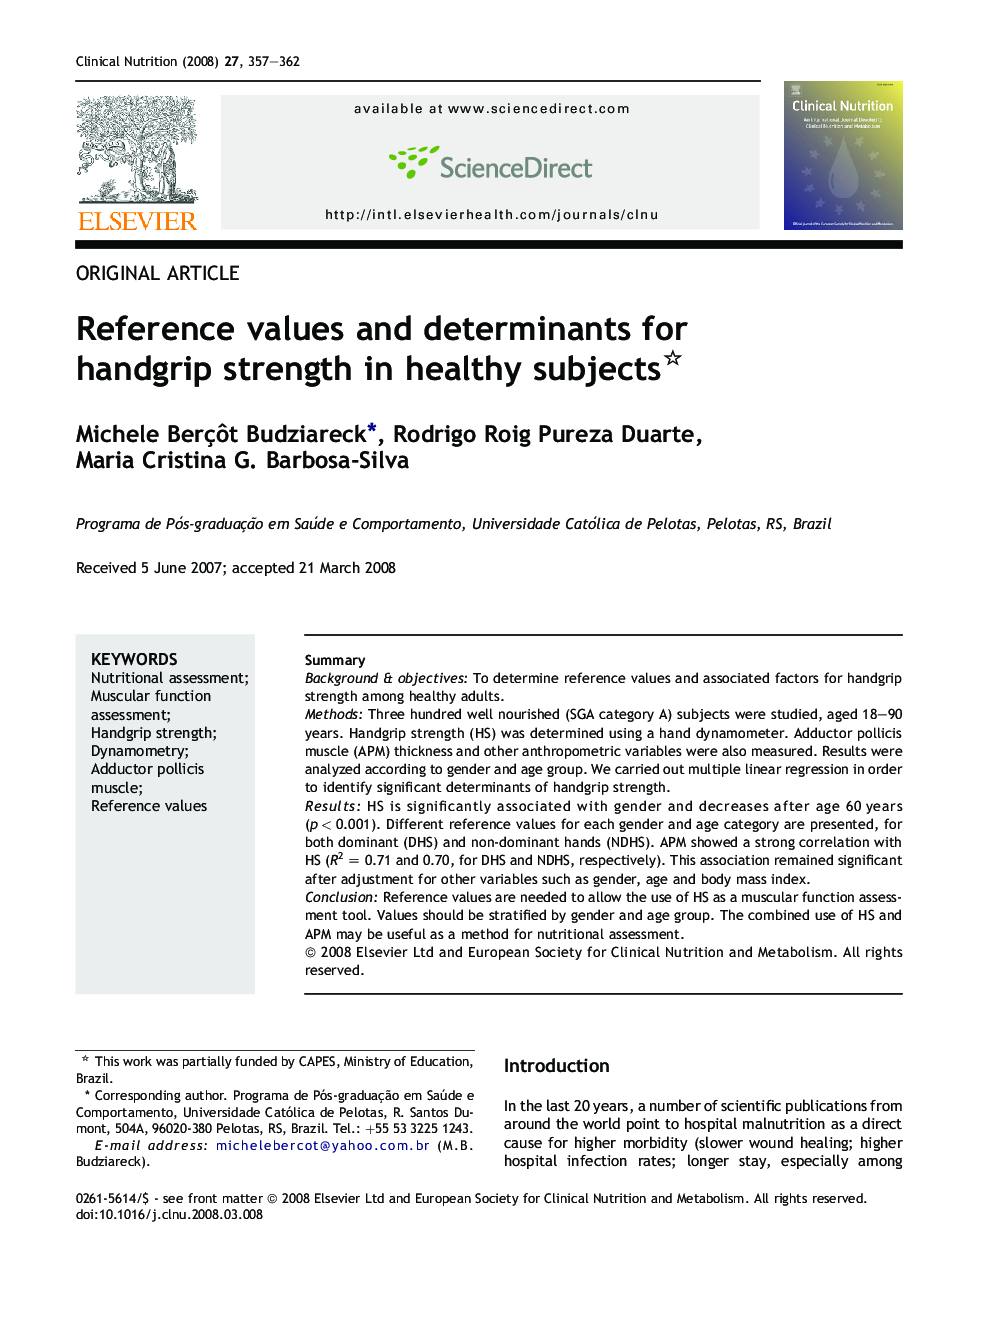 Reference values and determinants for handgrip strength in healthy subjects 